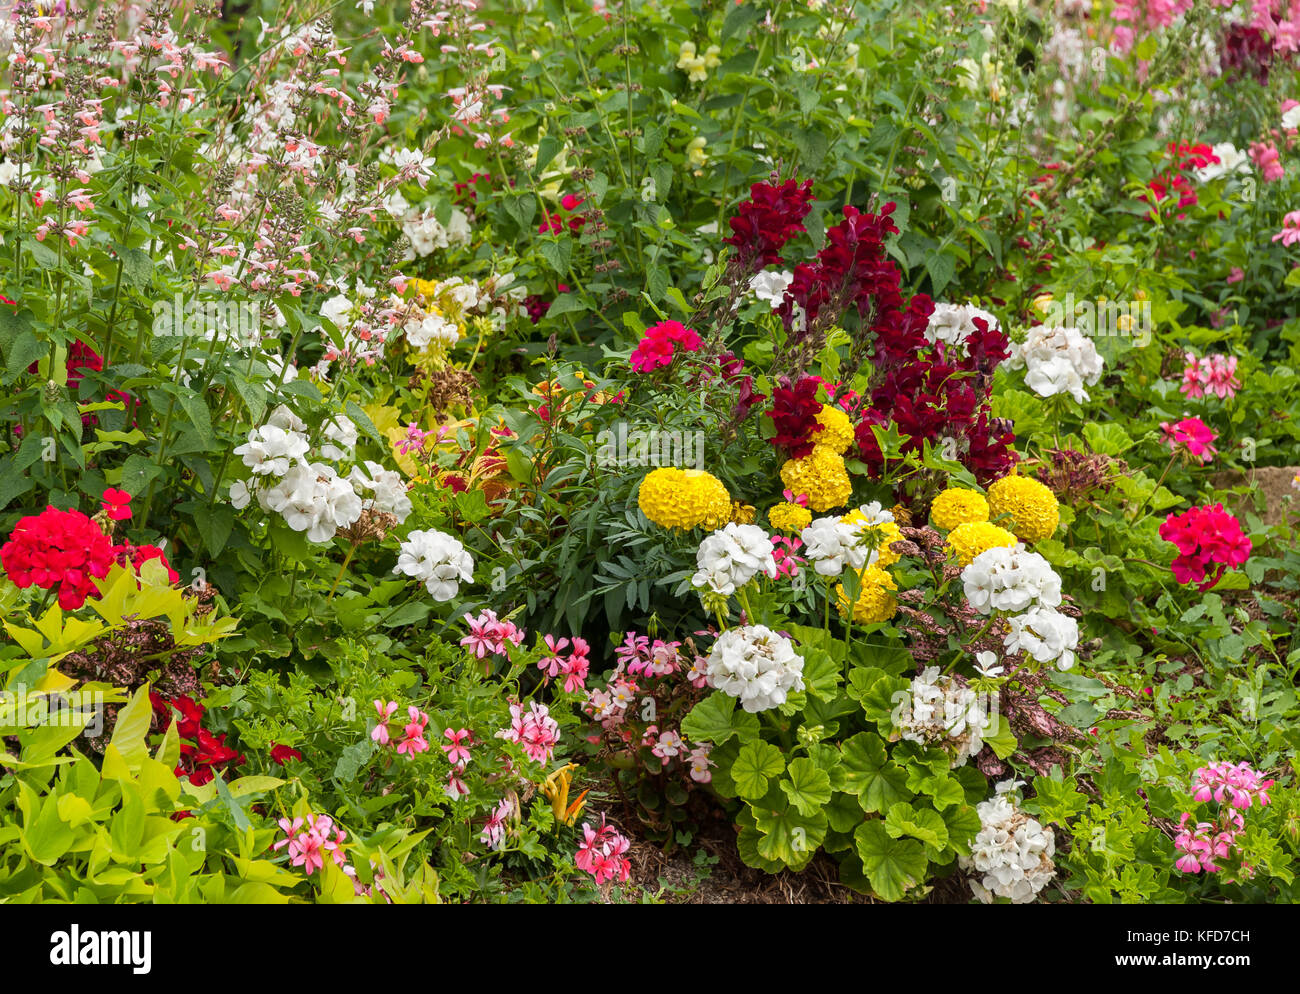 Flower bed with white, yellow, red and pink flowers near the cathedral in Reims, France Stock Photo